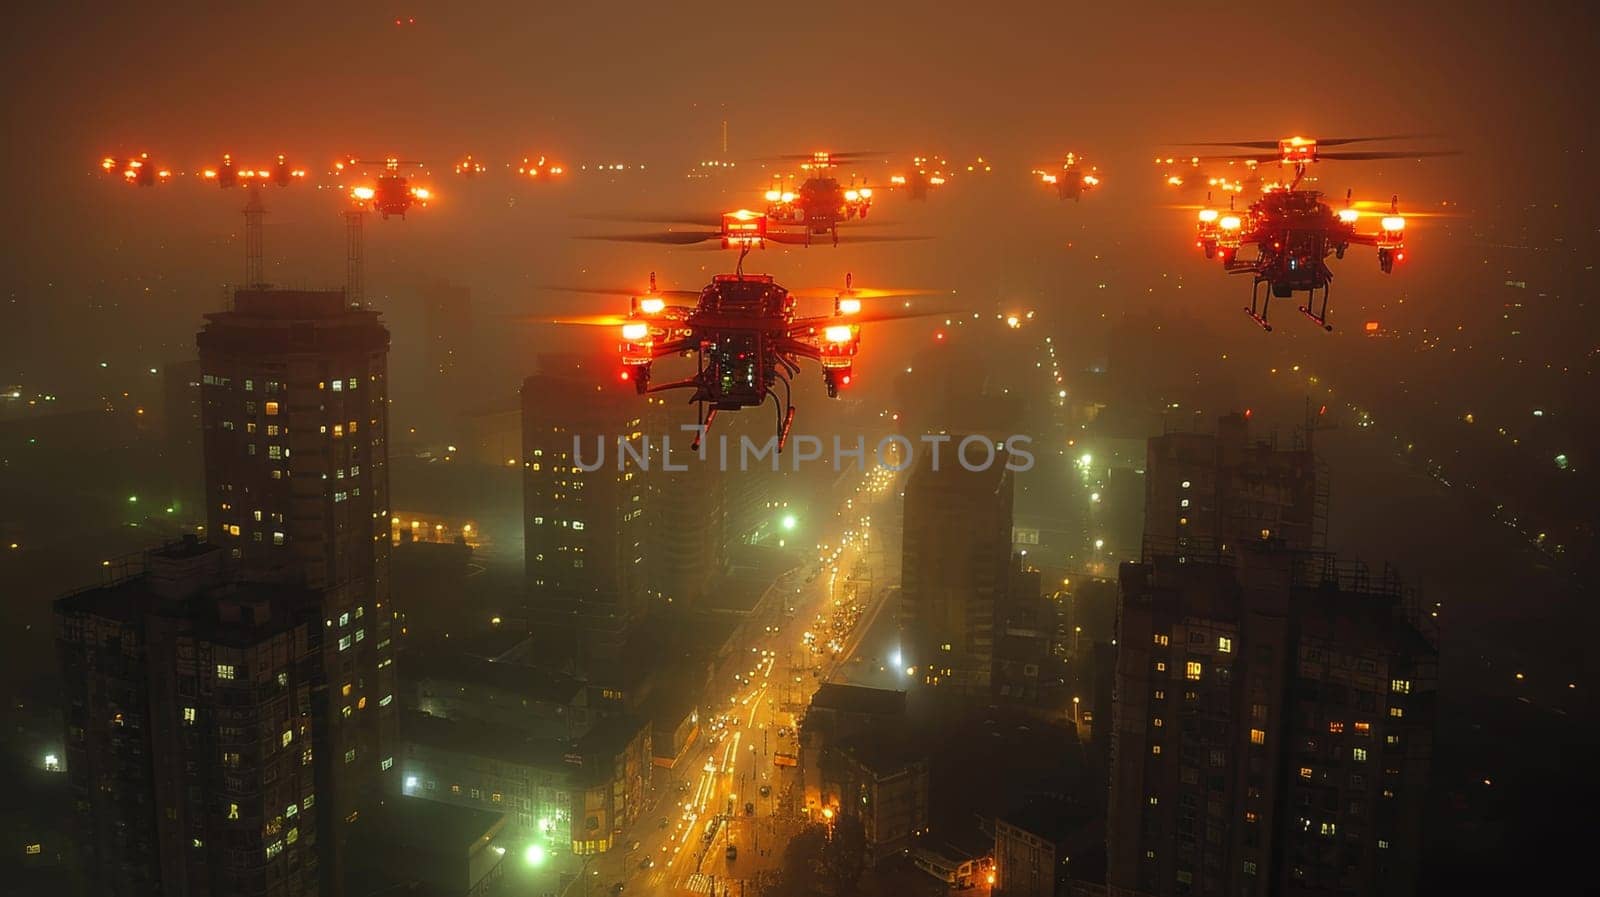 A squadron of unmanned aerial vehicles patrols over the evening city.